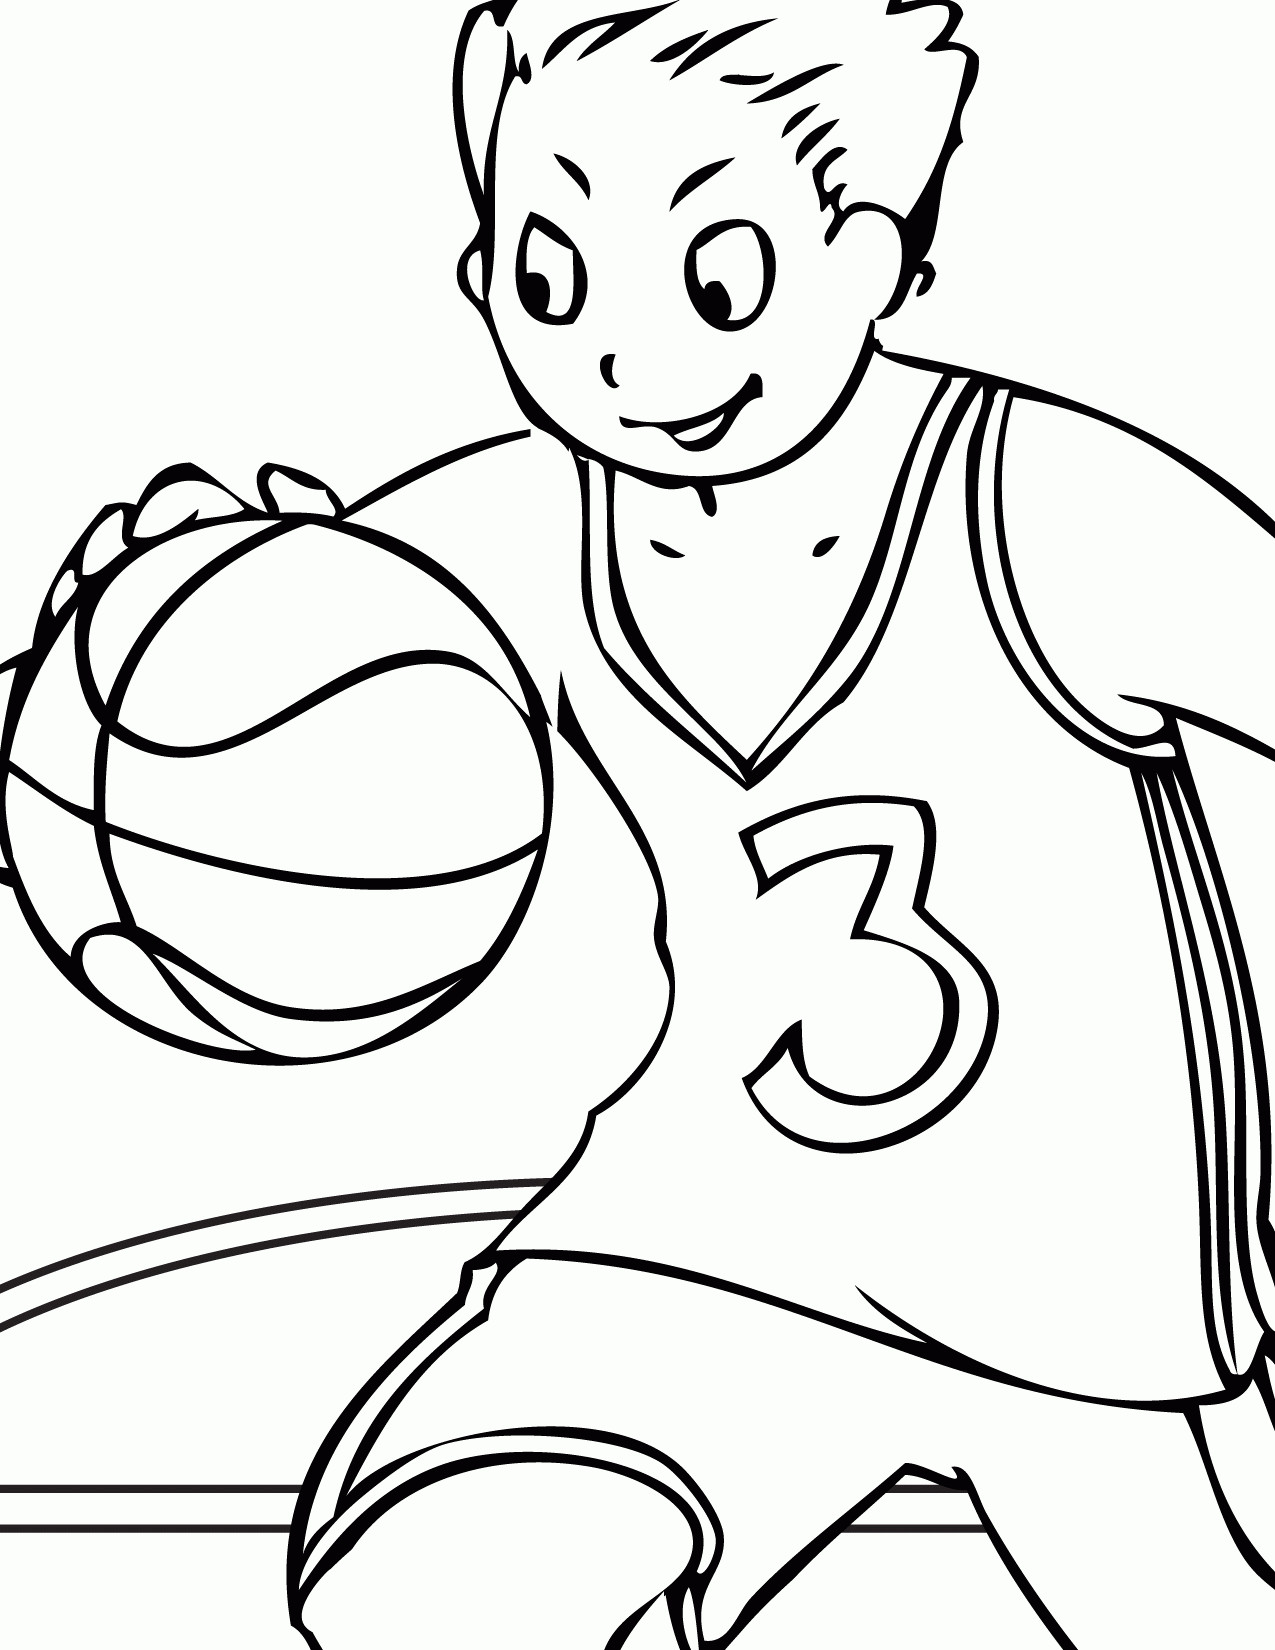 Sports Coloring Pages For Kids
 Coloring Pages Kids Playing Sports Coloring Home